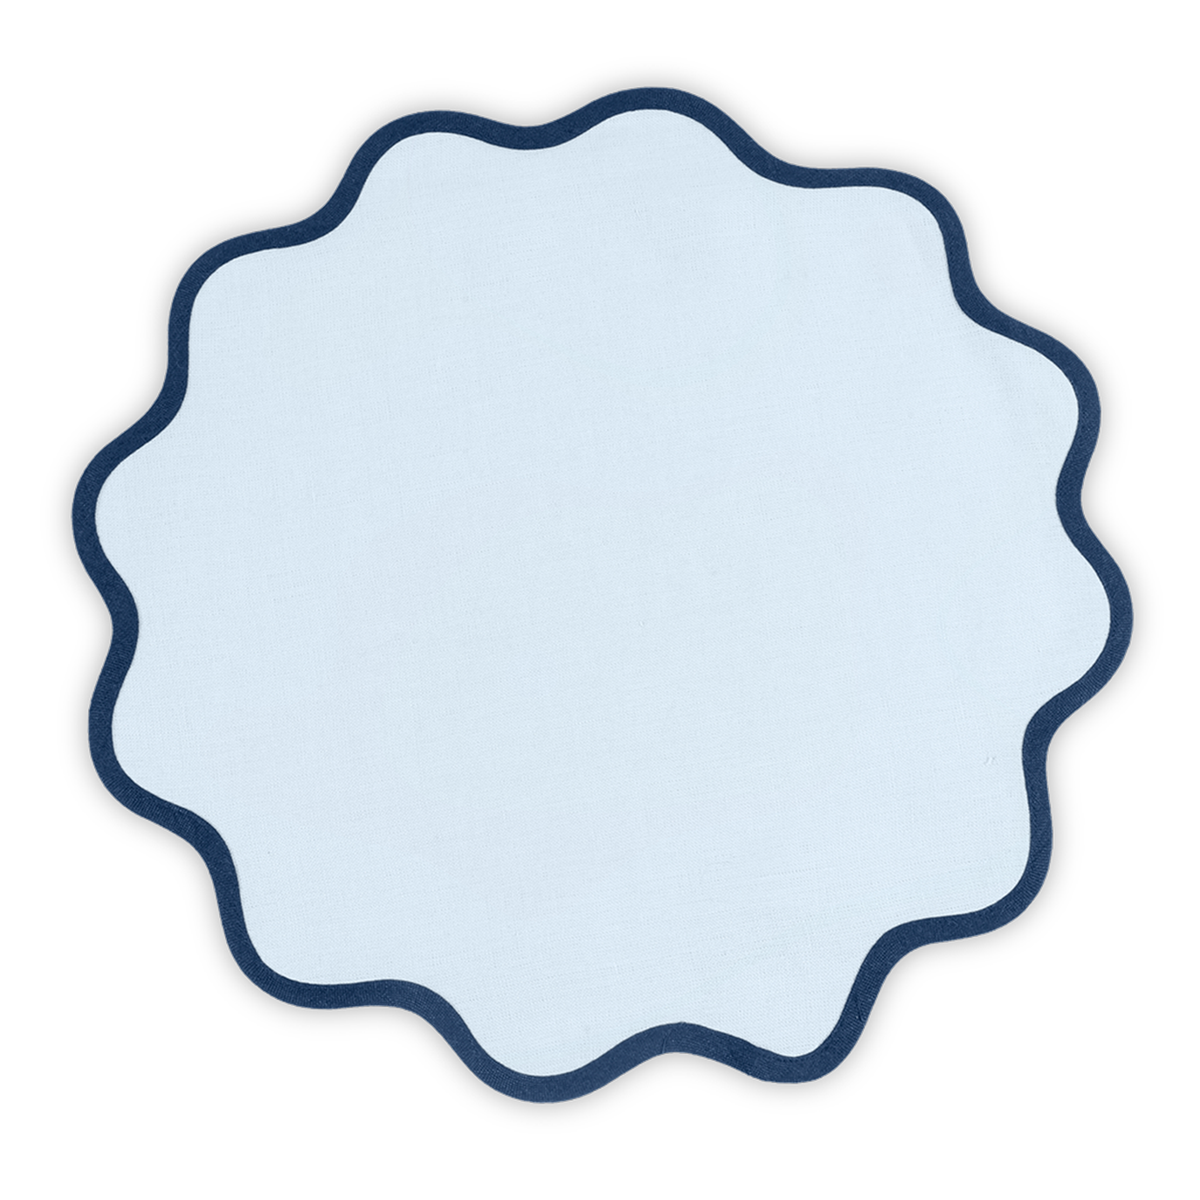 Silo Image of Matouk Scallop Edge Circle Placemat in Color Ice Blue/Navy